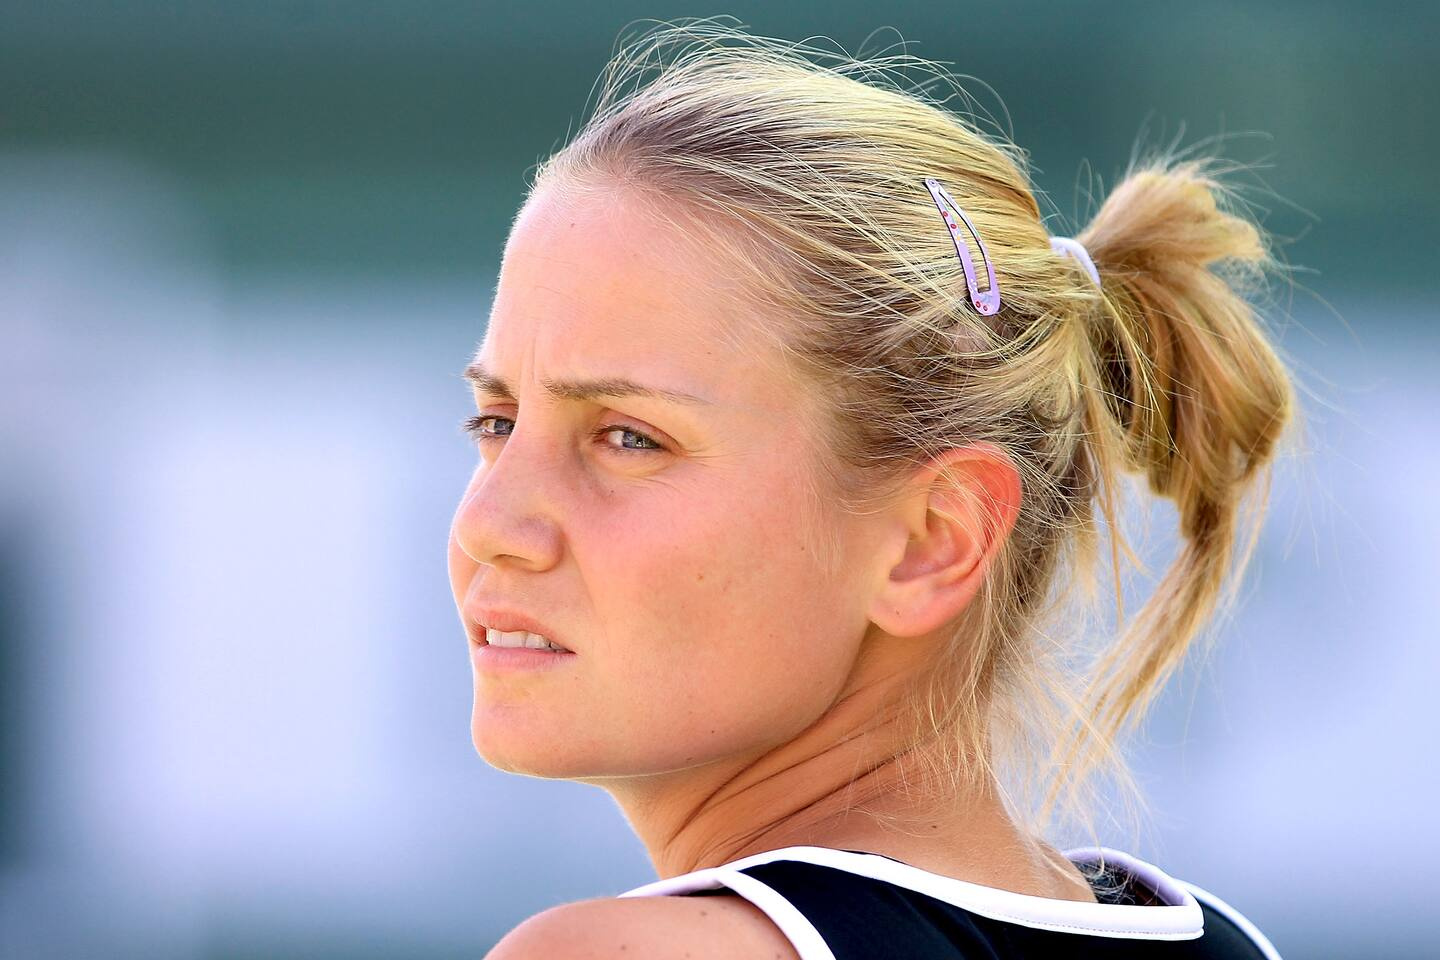 Jelena Dokic almost committed suicide